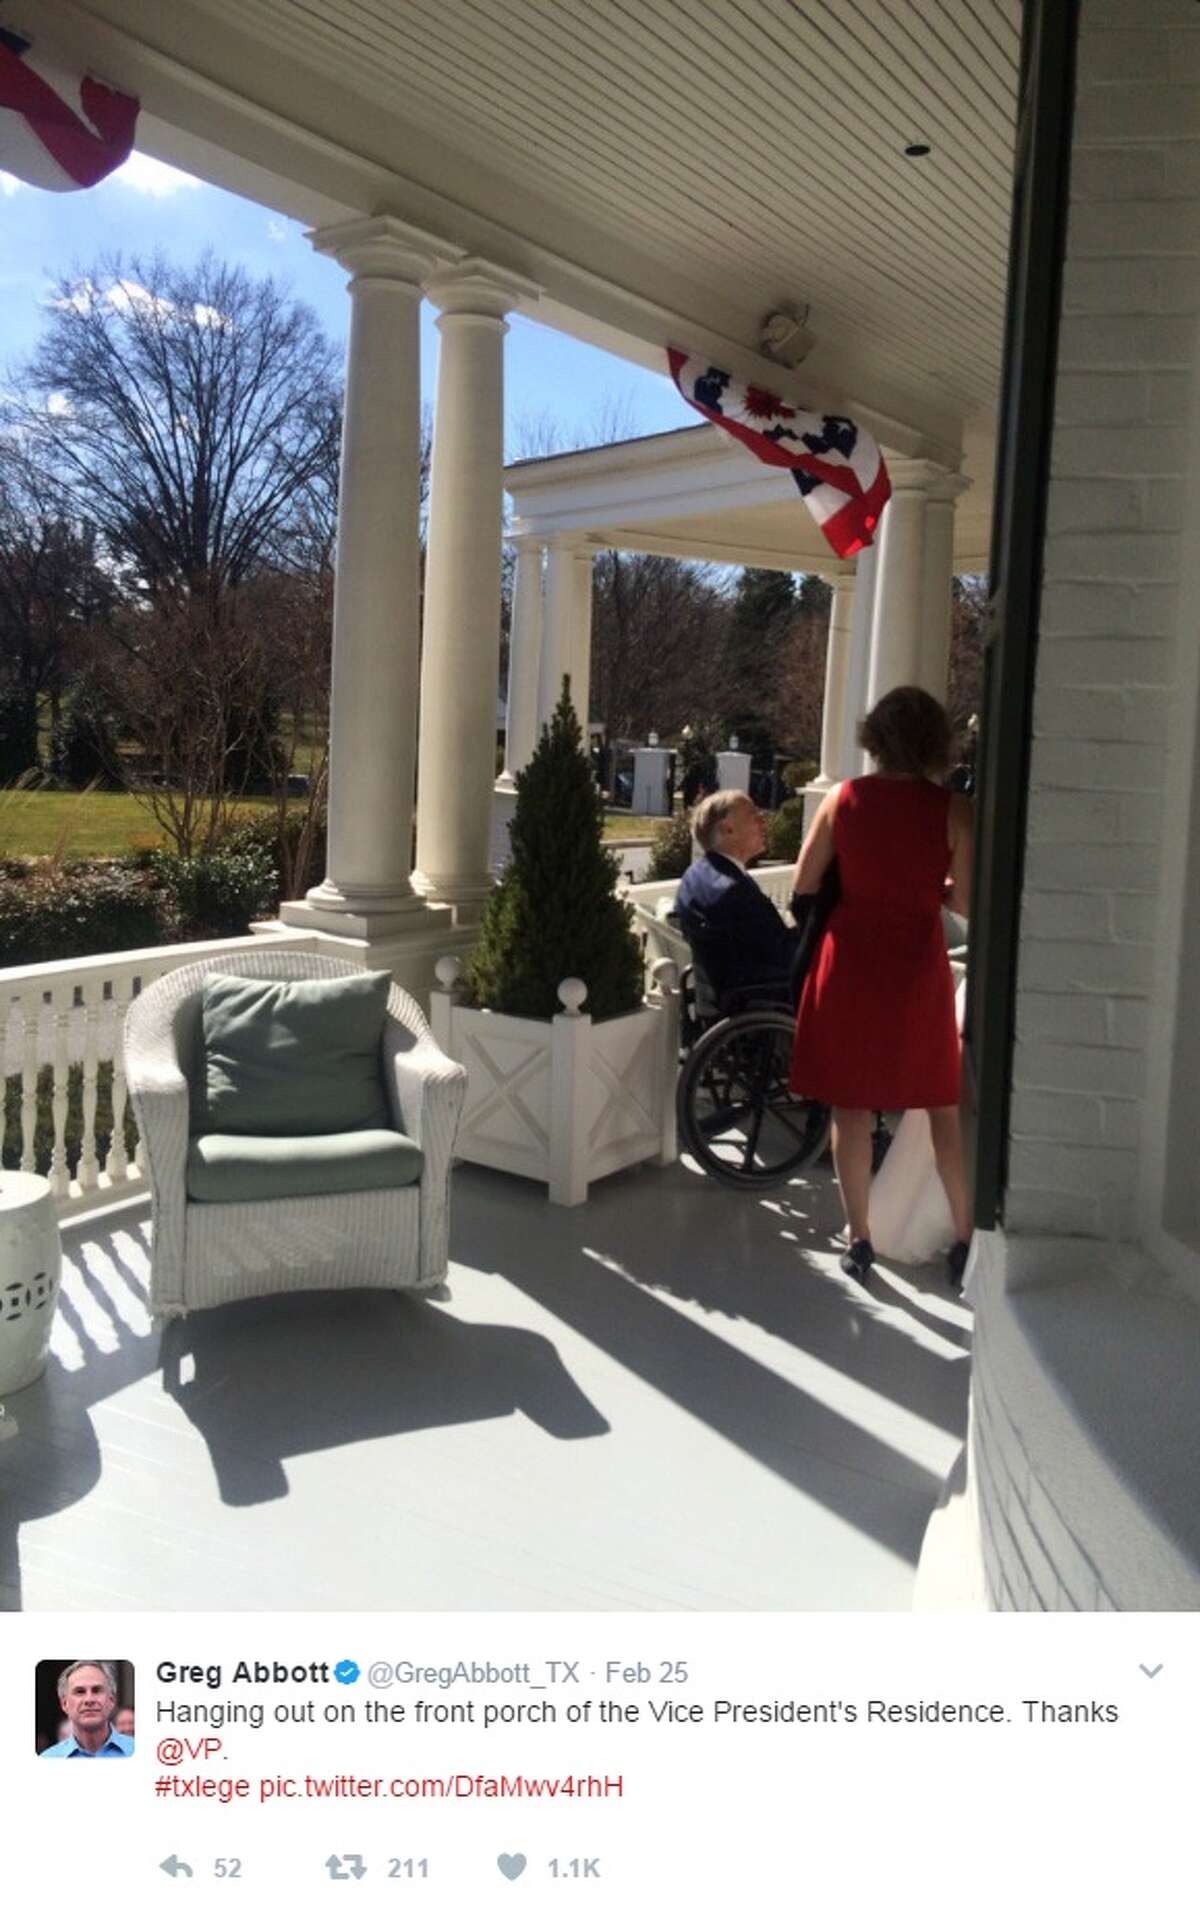 @GregAbbott_TX: "Hanging out on the front porch of the Vice President's Residence. Thanks @VP. #txlege"